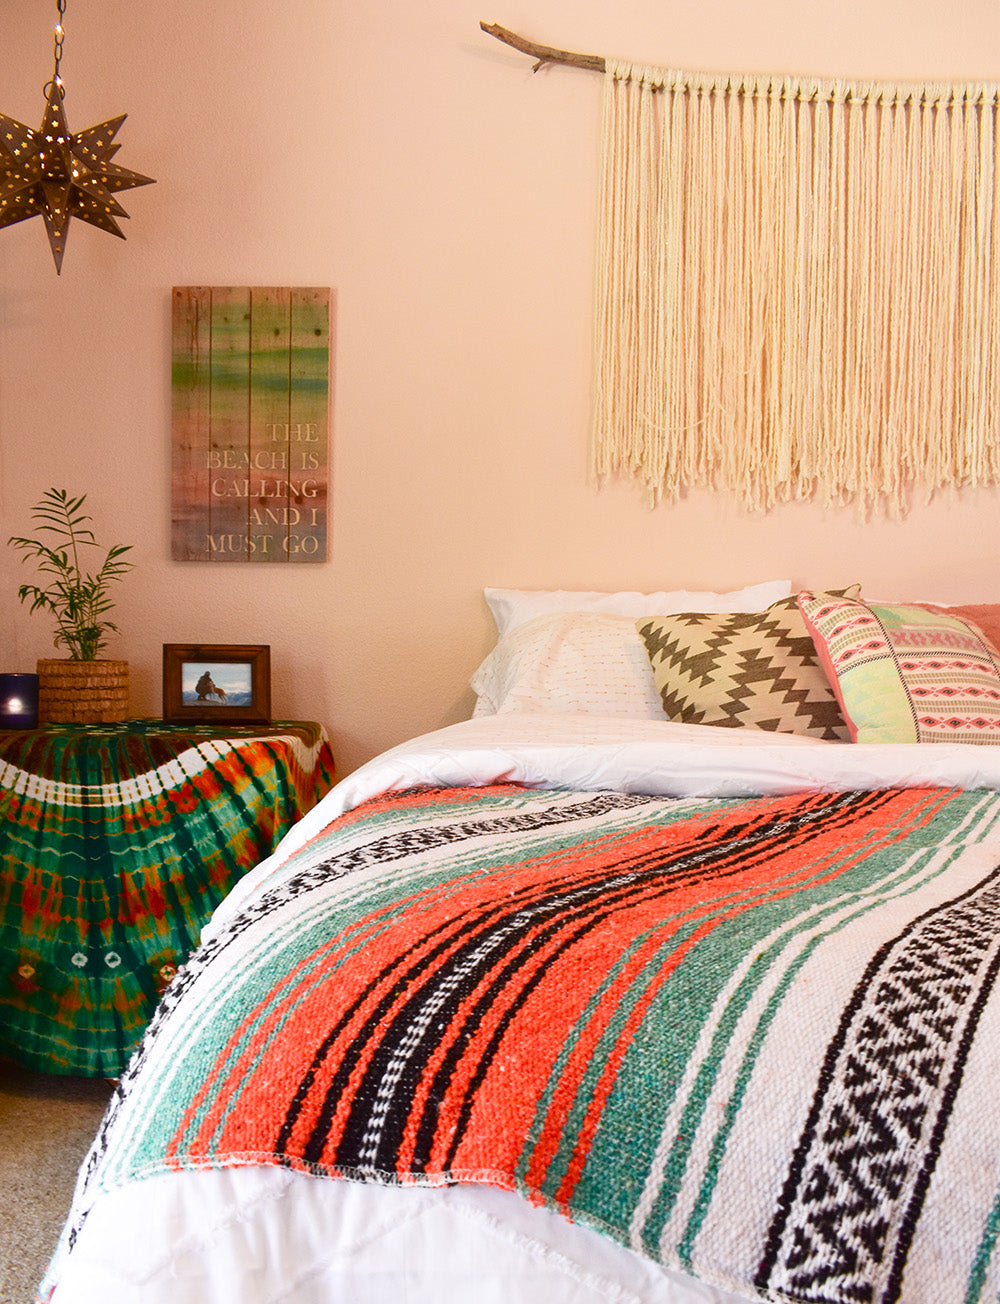 Beachy summer style for the boho bedroom. Tropical color. Patterns & Texture. Drift Wood. Tie-Dye. Summer 2018 is set.